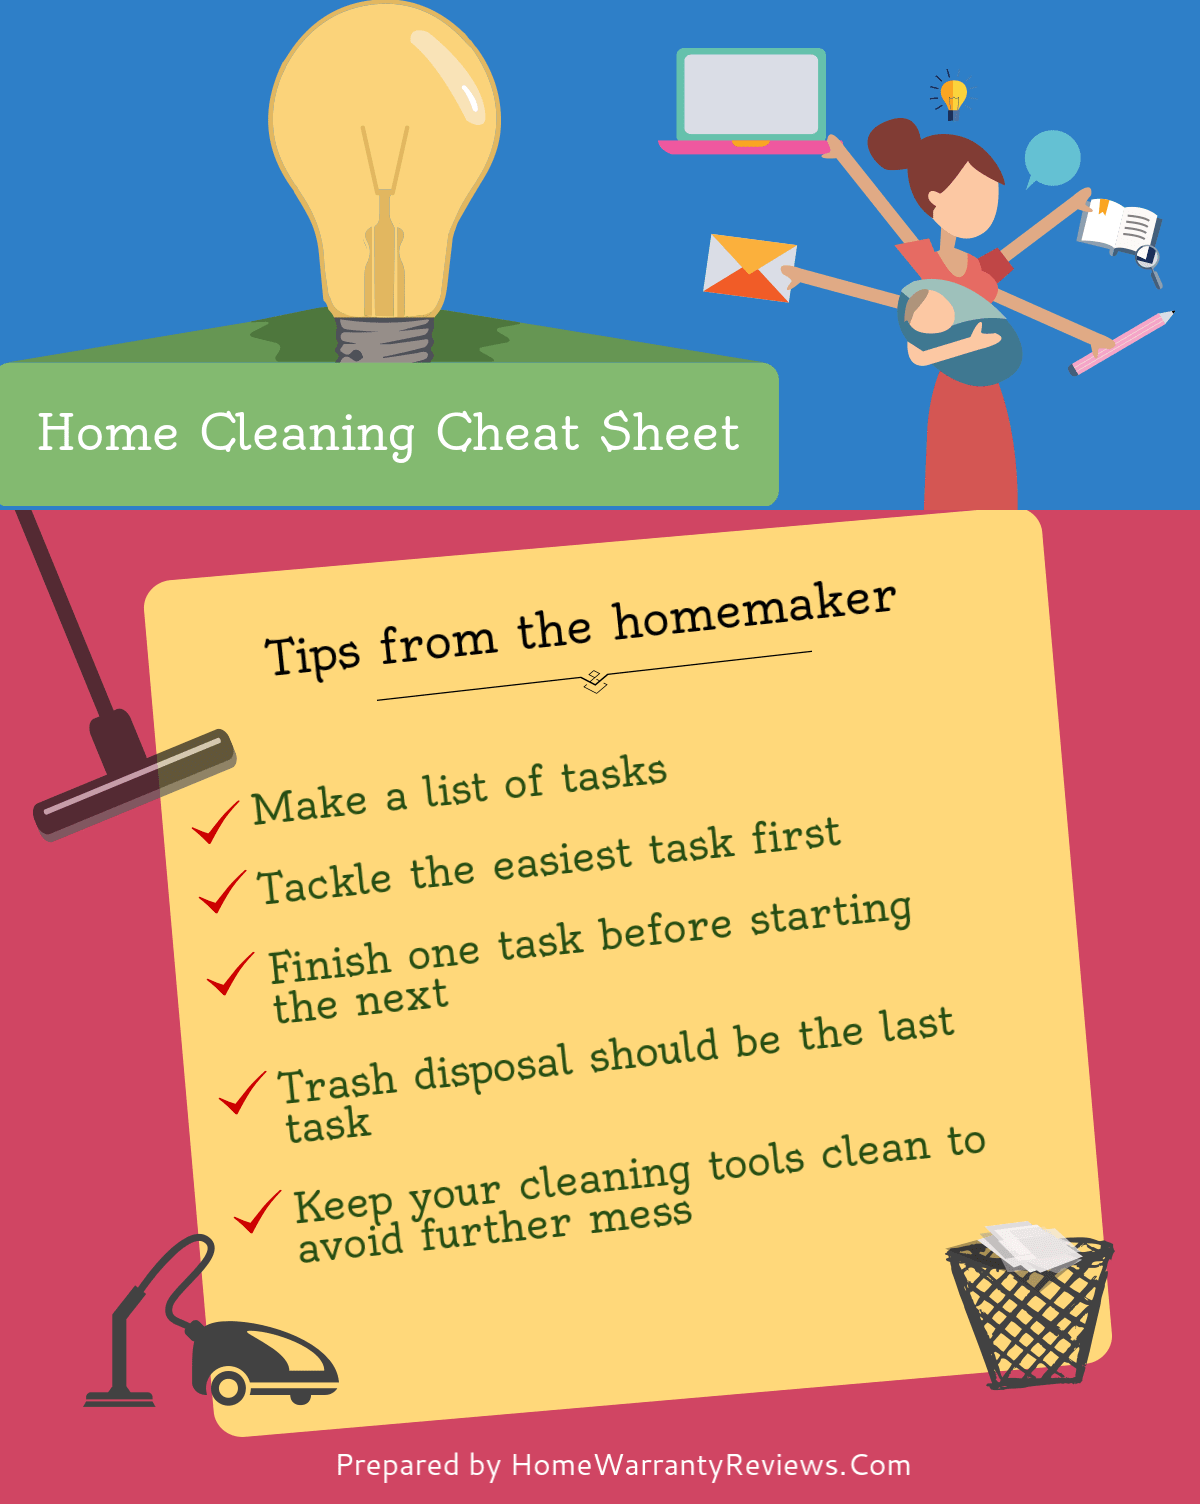 https://www.homewarrantyreviews.com/wp-content/uploads/Home-cleaning-tips.png